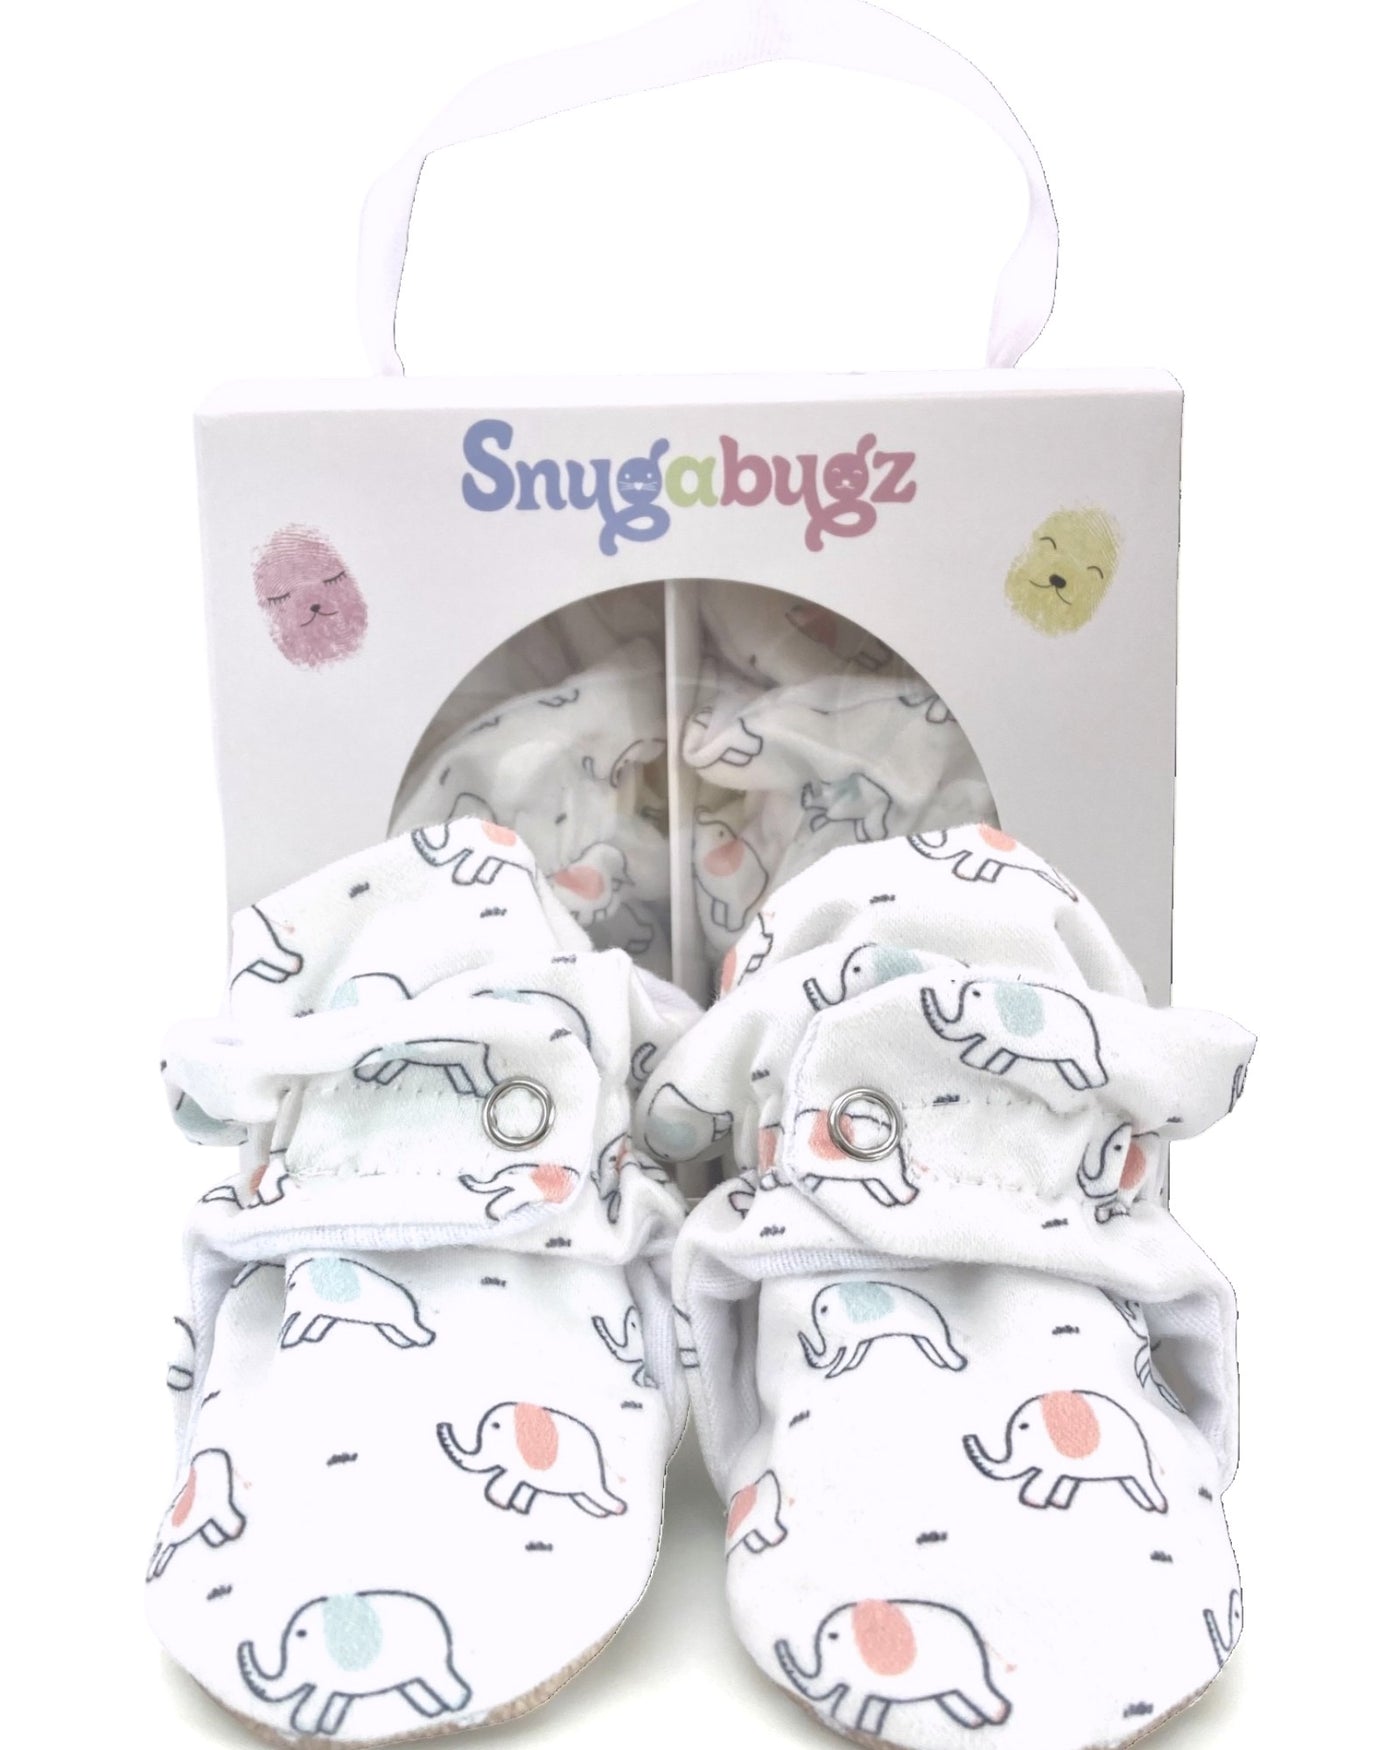 Stay-on baby booties featuring an elephant print on white cotton fabric, with non-slip soles and adjustable three snap closure. Made from organic cotton. With Cute Gift box